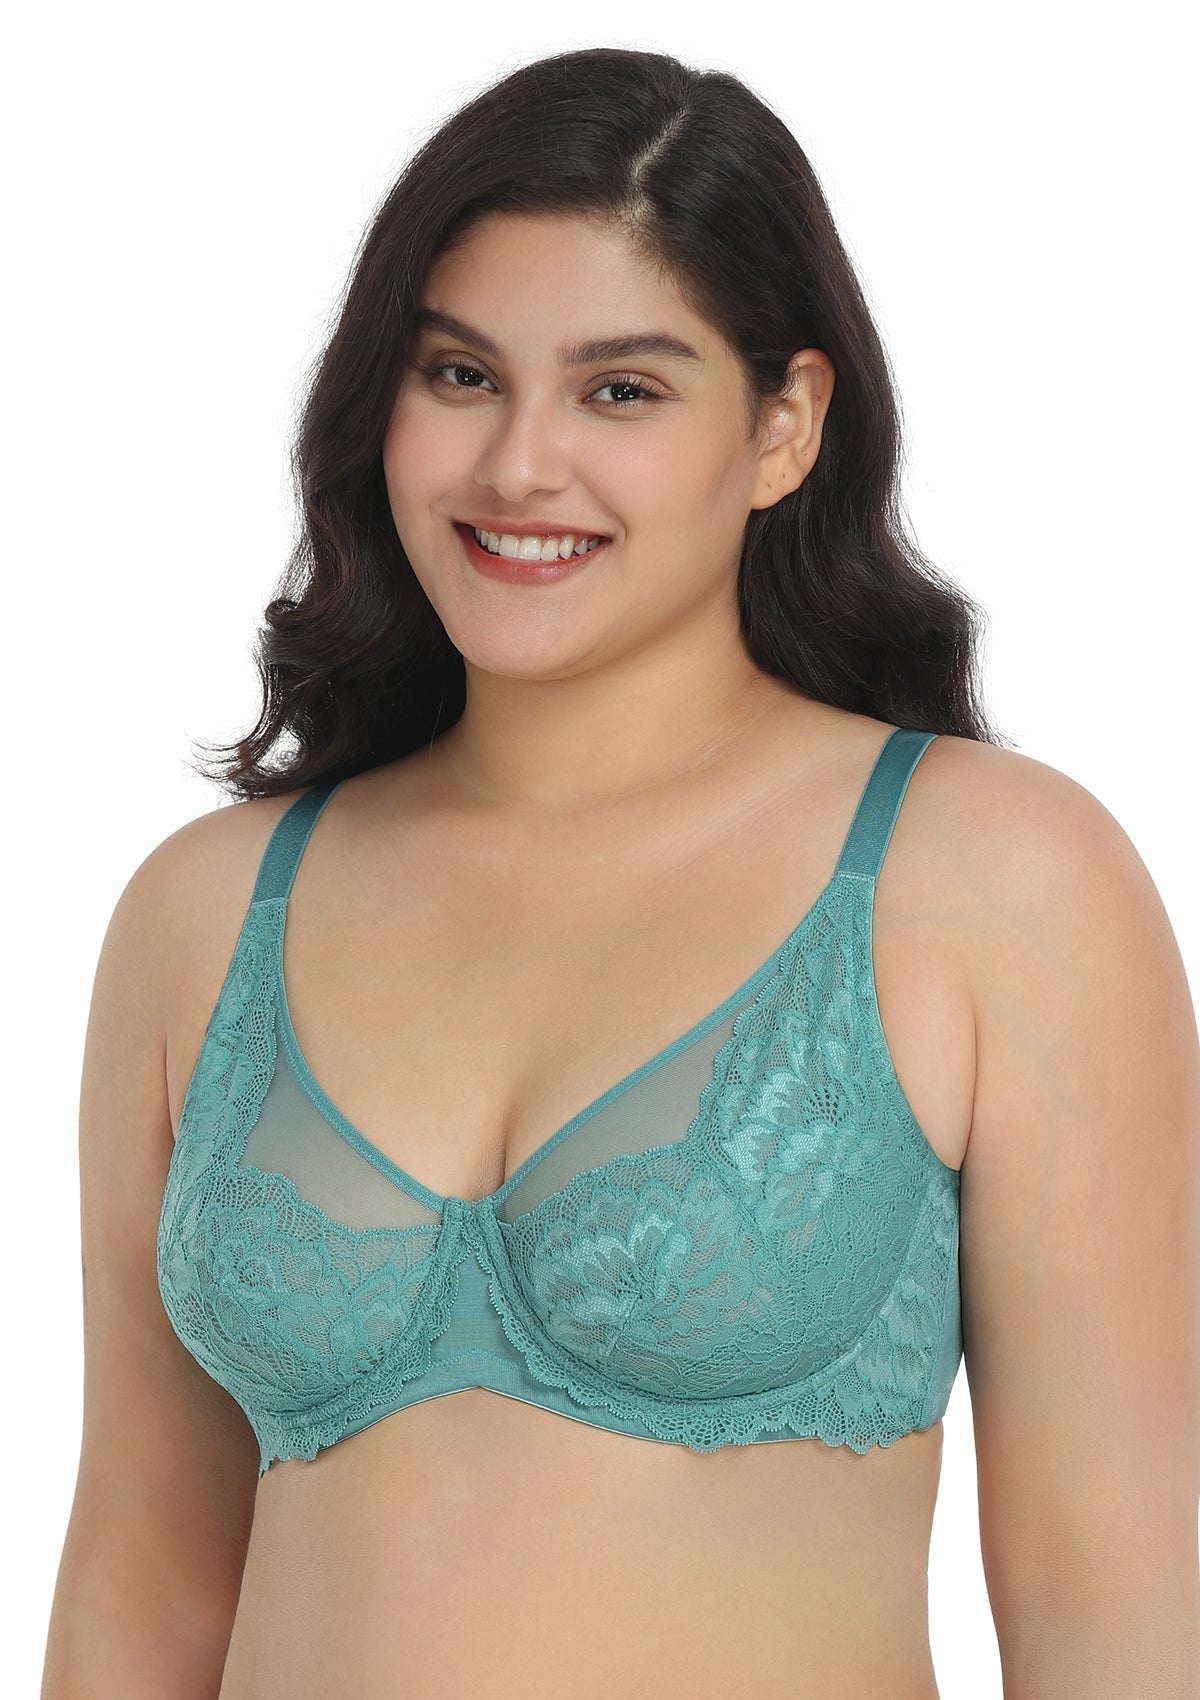 HSIA Paeonia Lace Full Coverage Underwire Non-Padded Uplifting Bra - Teal / 34 / DD/E